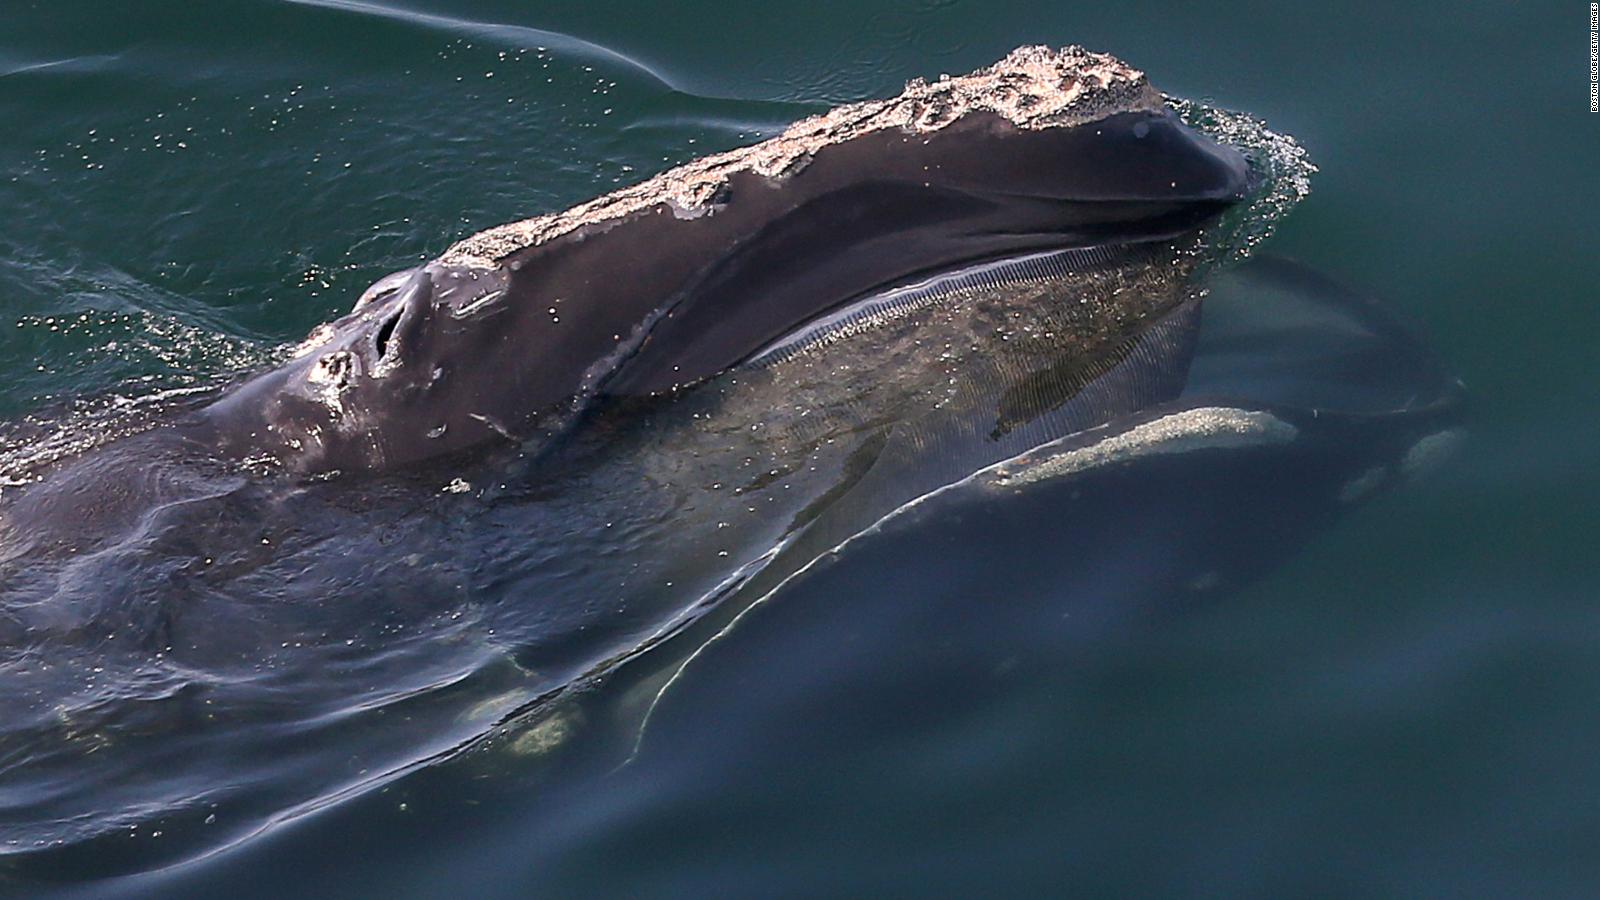 Dozens of right whales are off Nantucket Island where one is stuck in